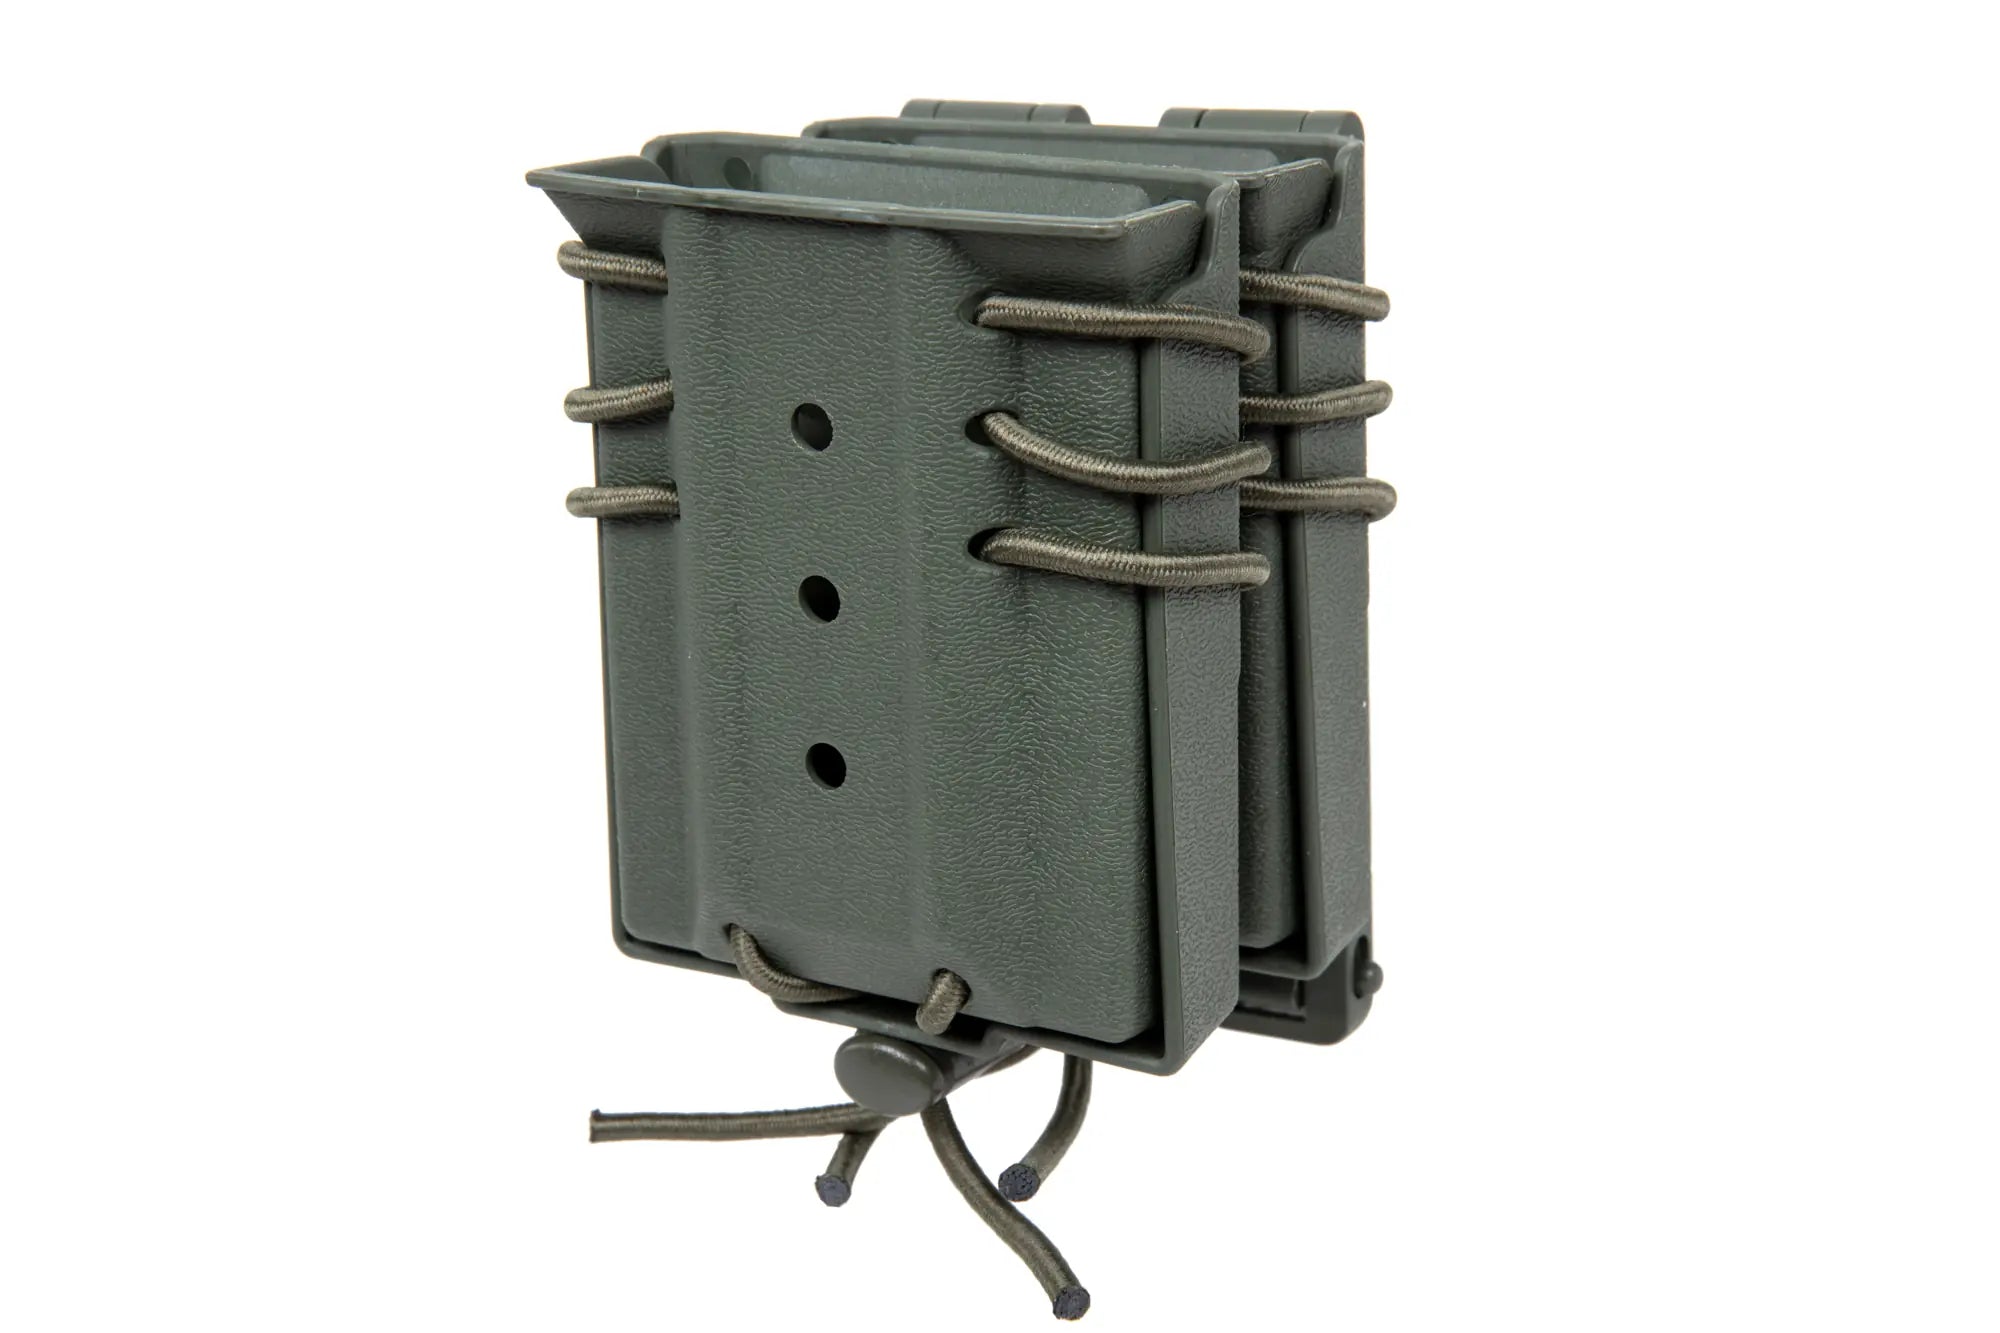 Carrier for 2 M4/M16 magazines Wosport Urban Assault Quick Pull Olive-2